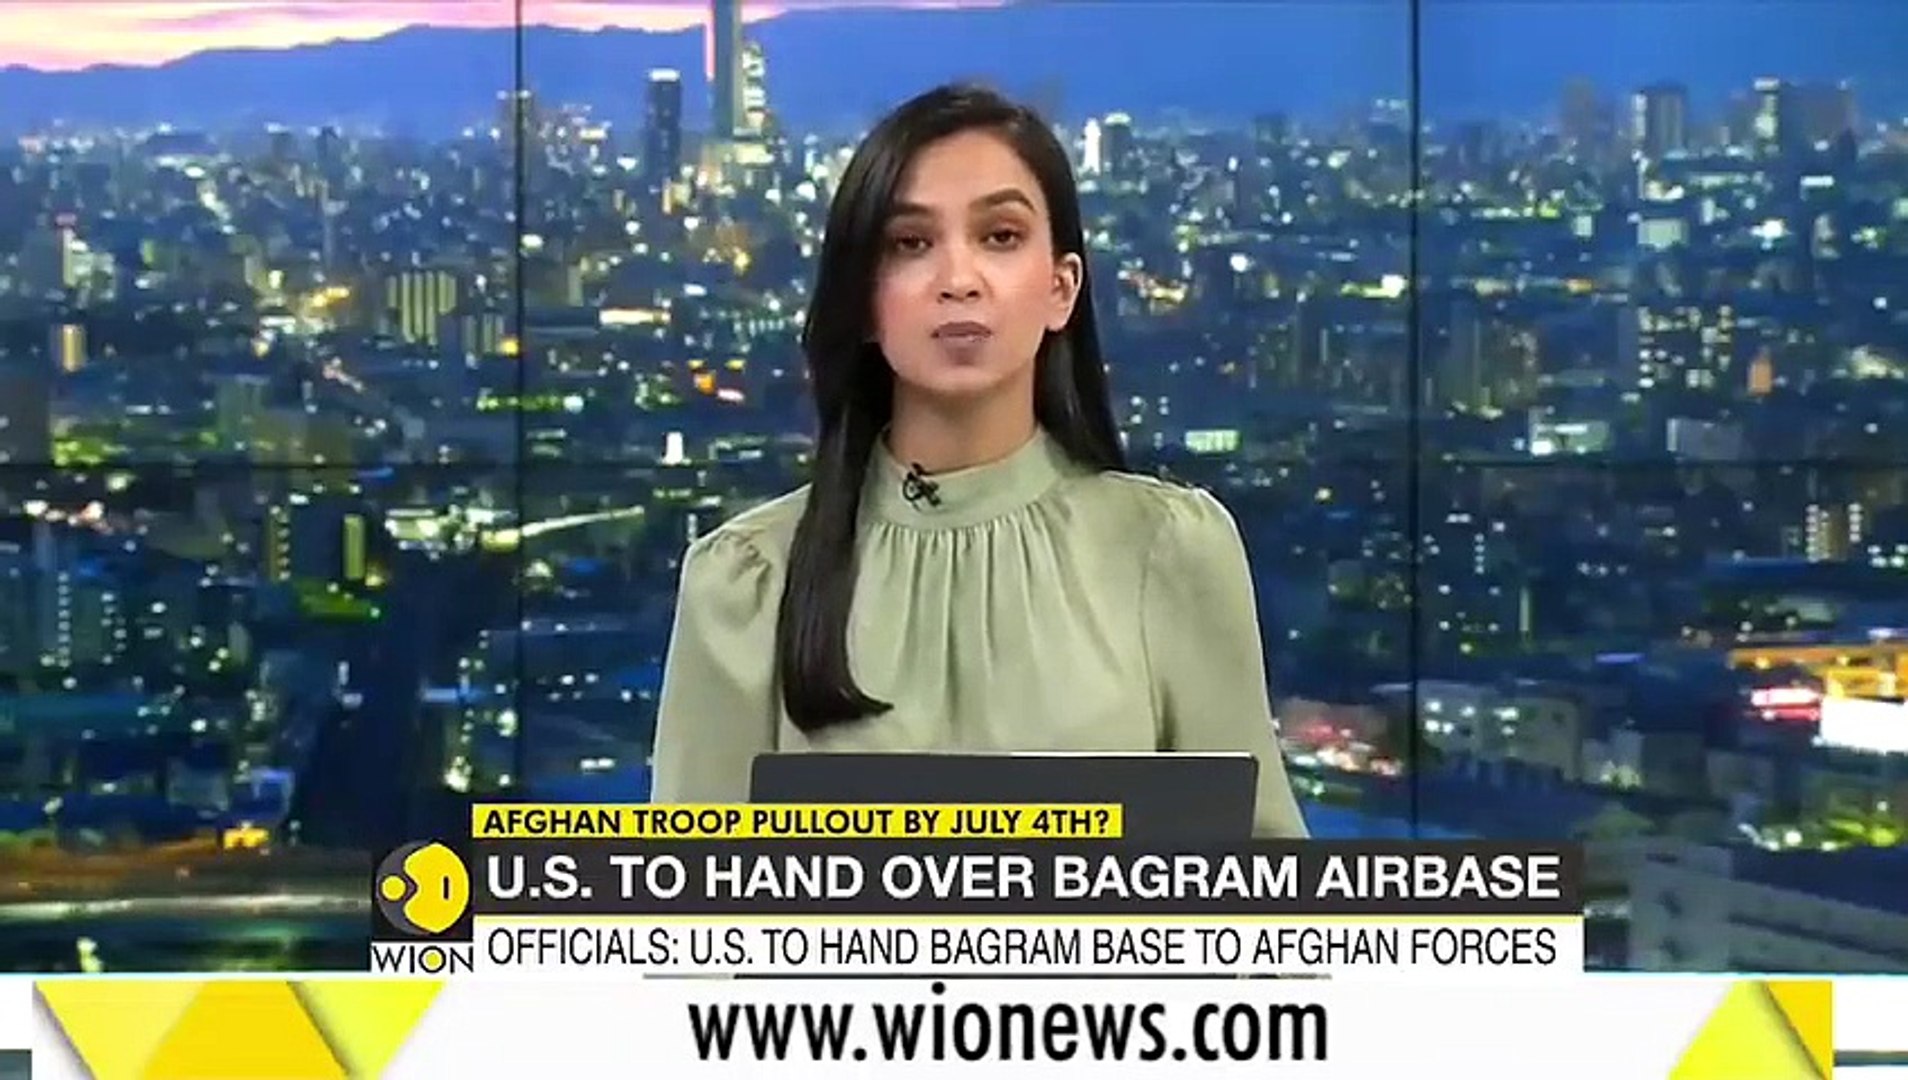 Officials- US to hand Bagram base to Afghan forces in 20 days - Complete troop withdrawal by July 4-